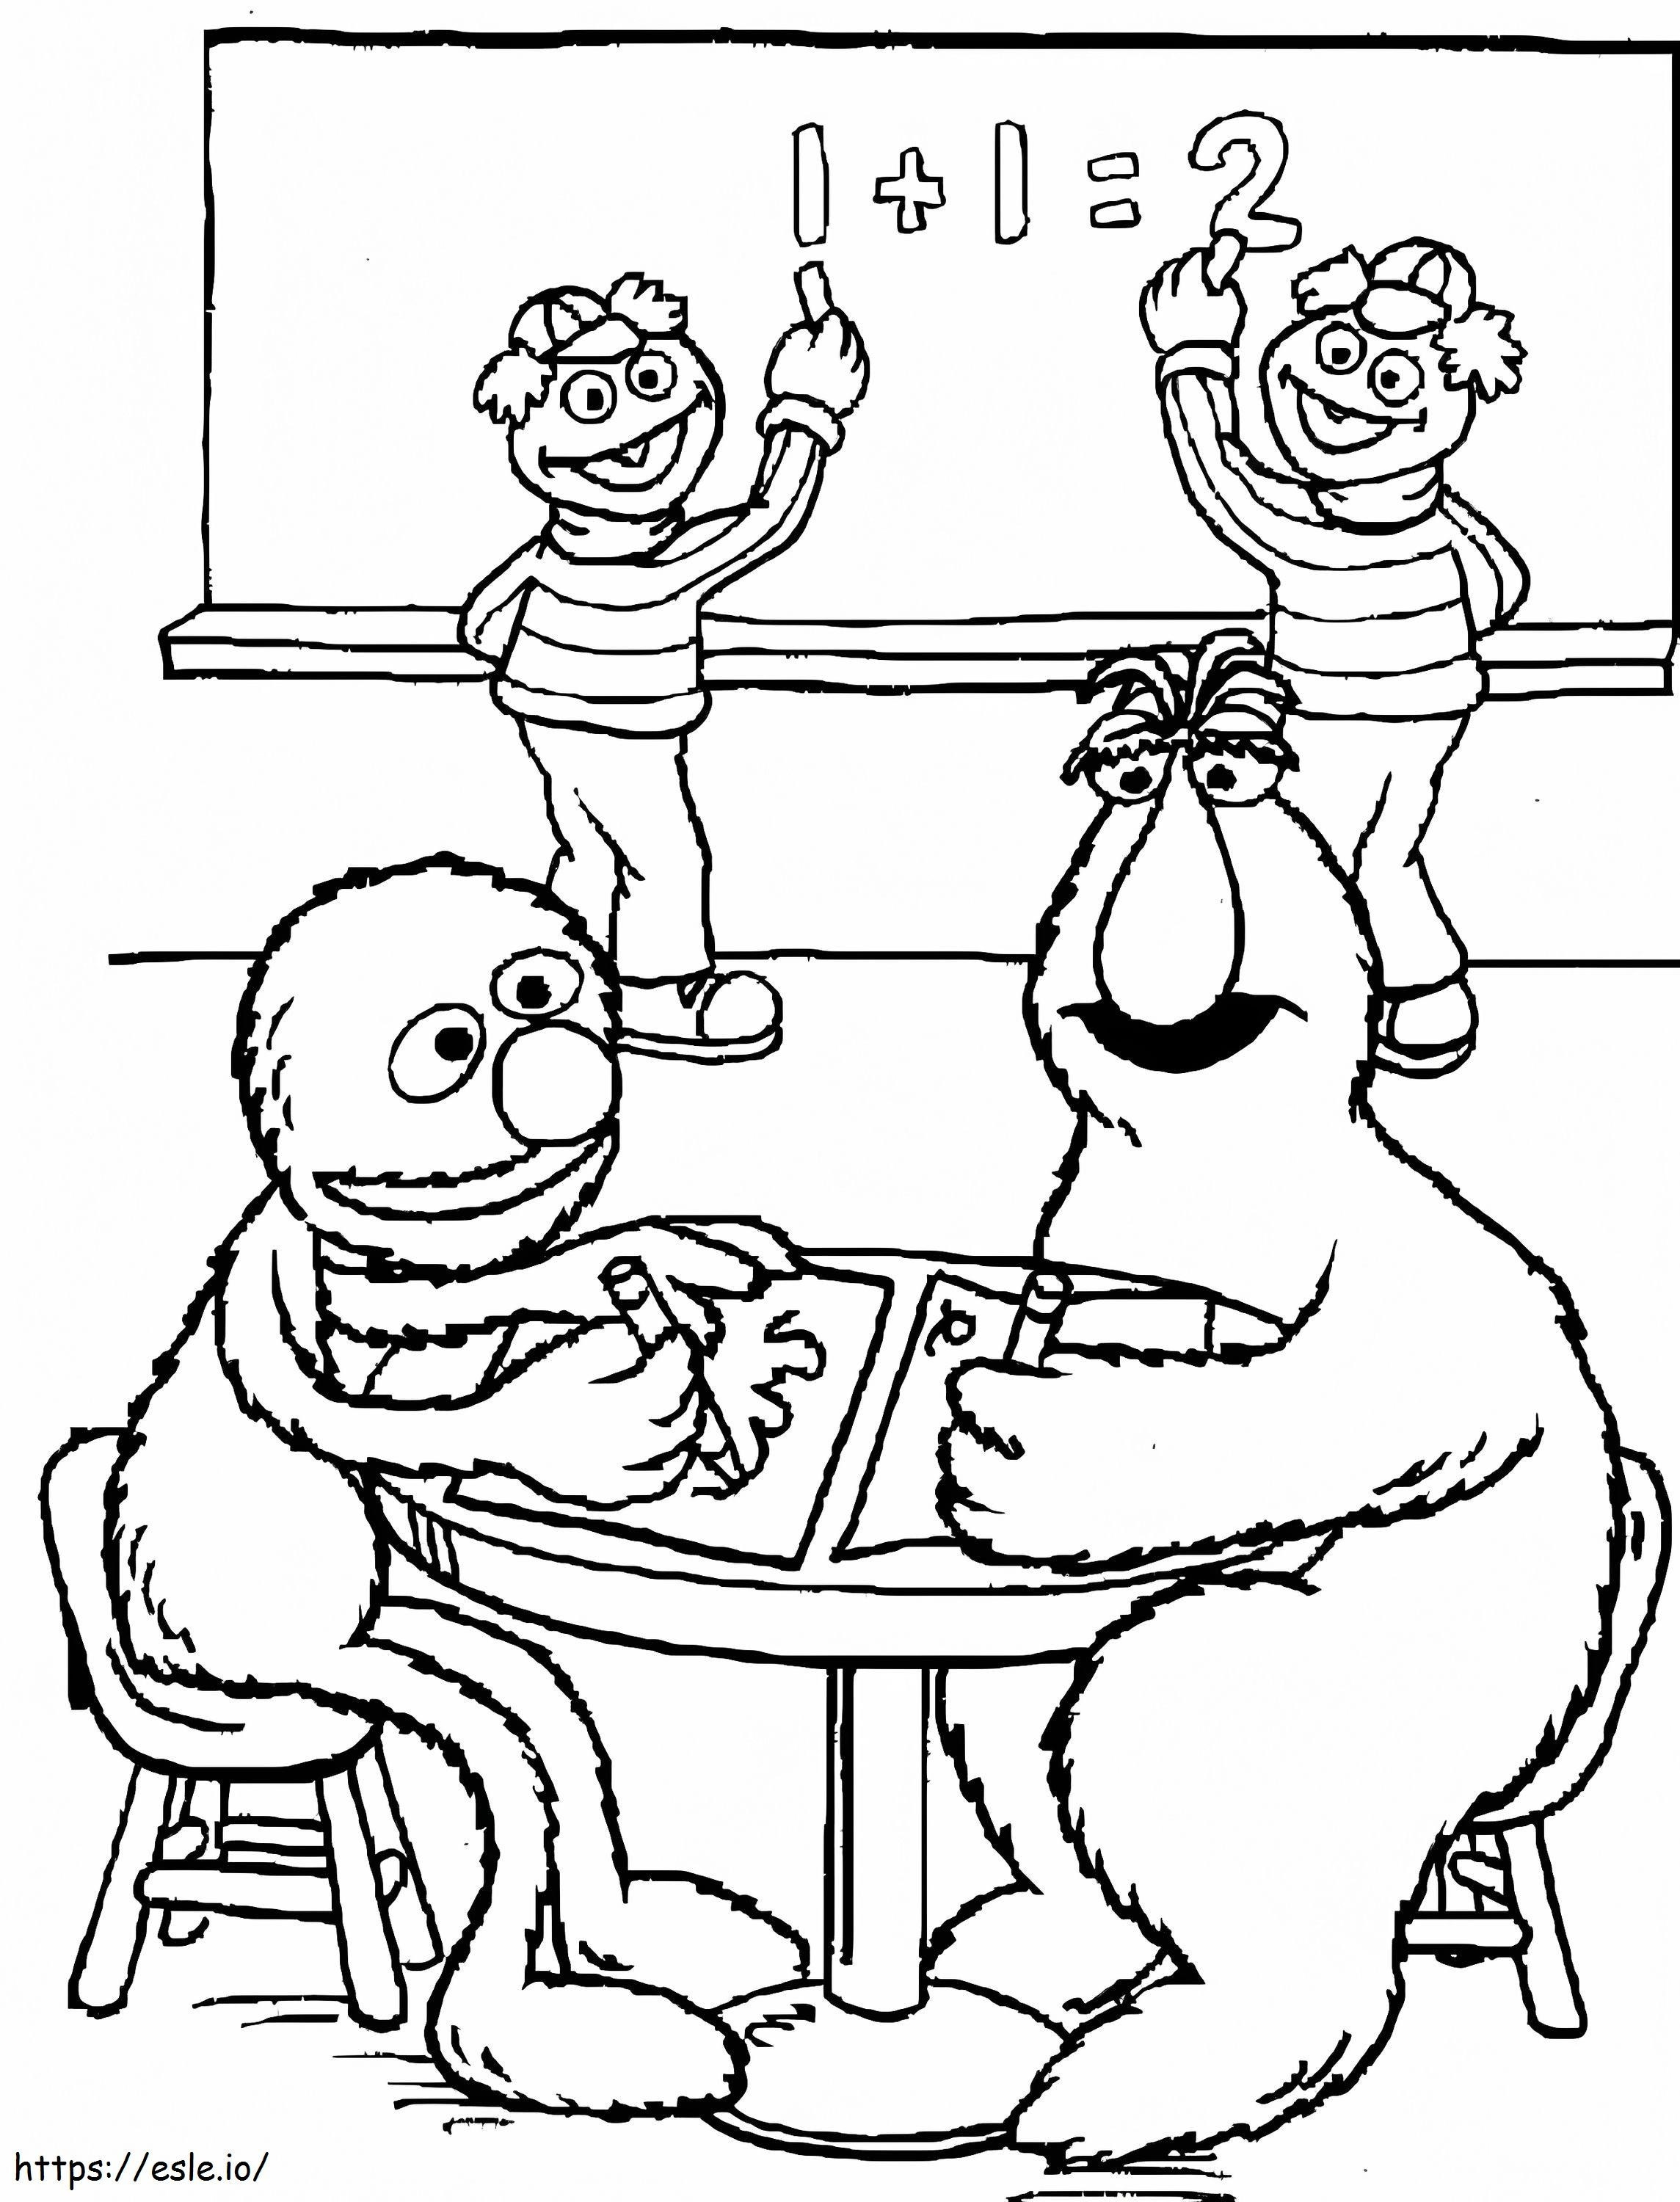 Grover In Class coloring page